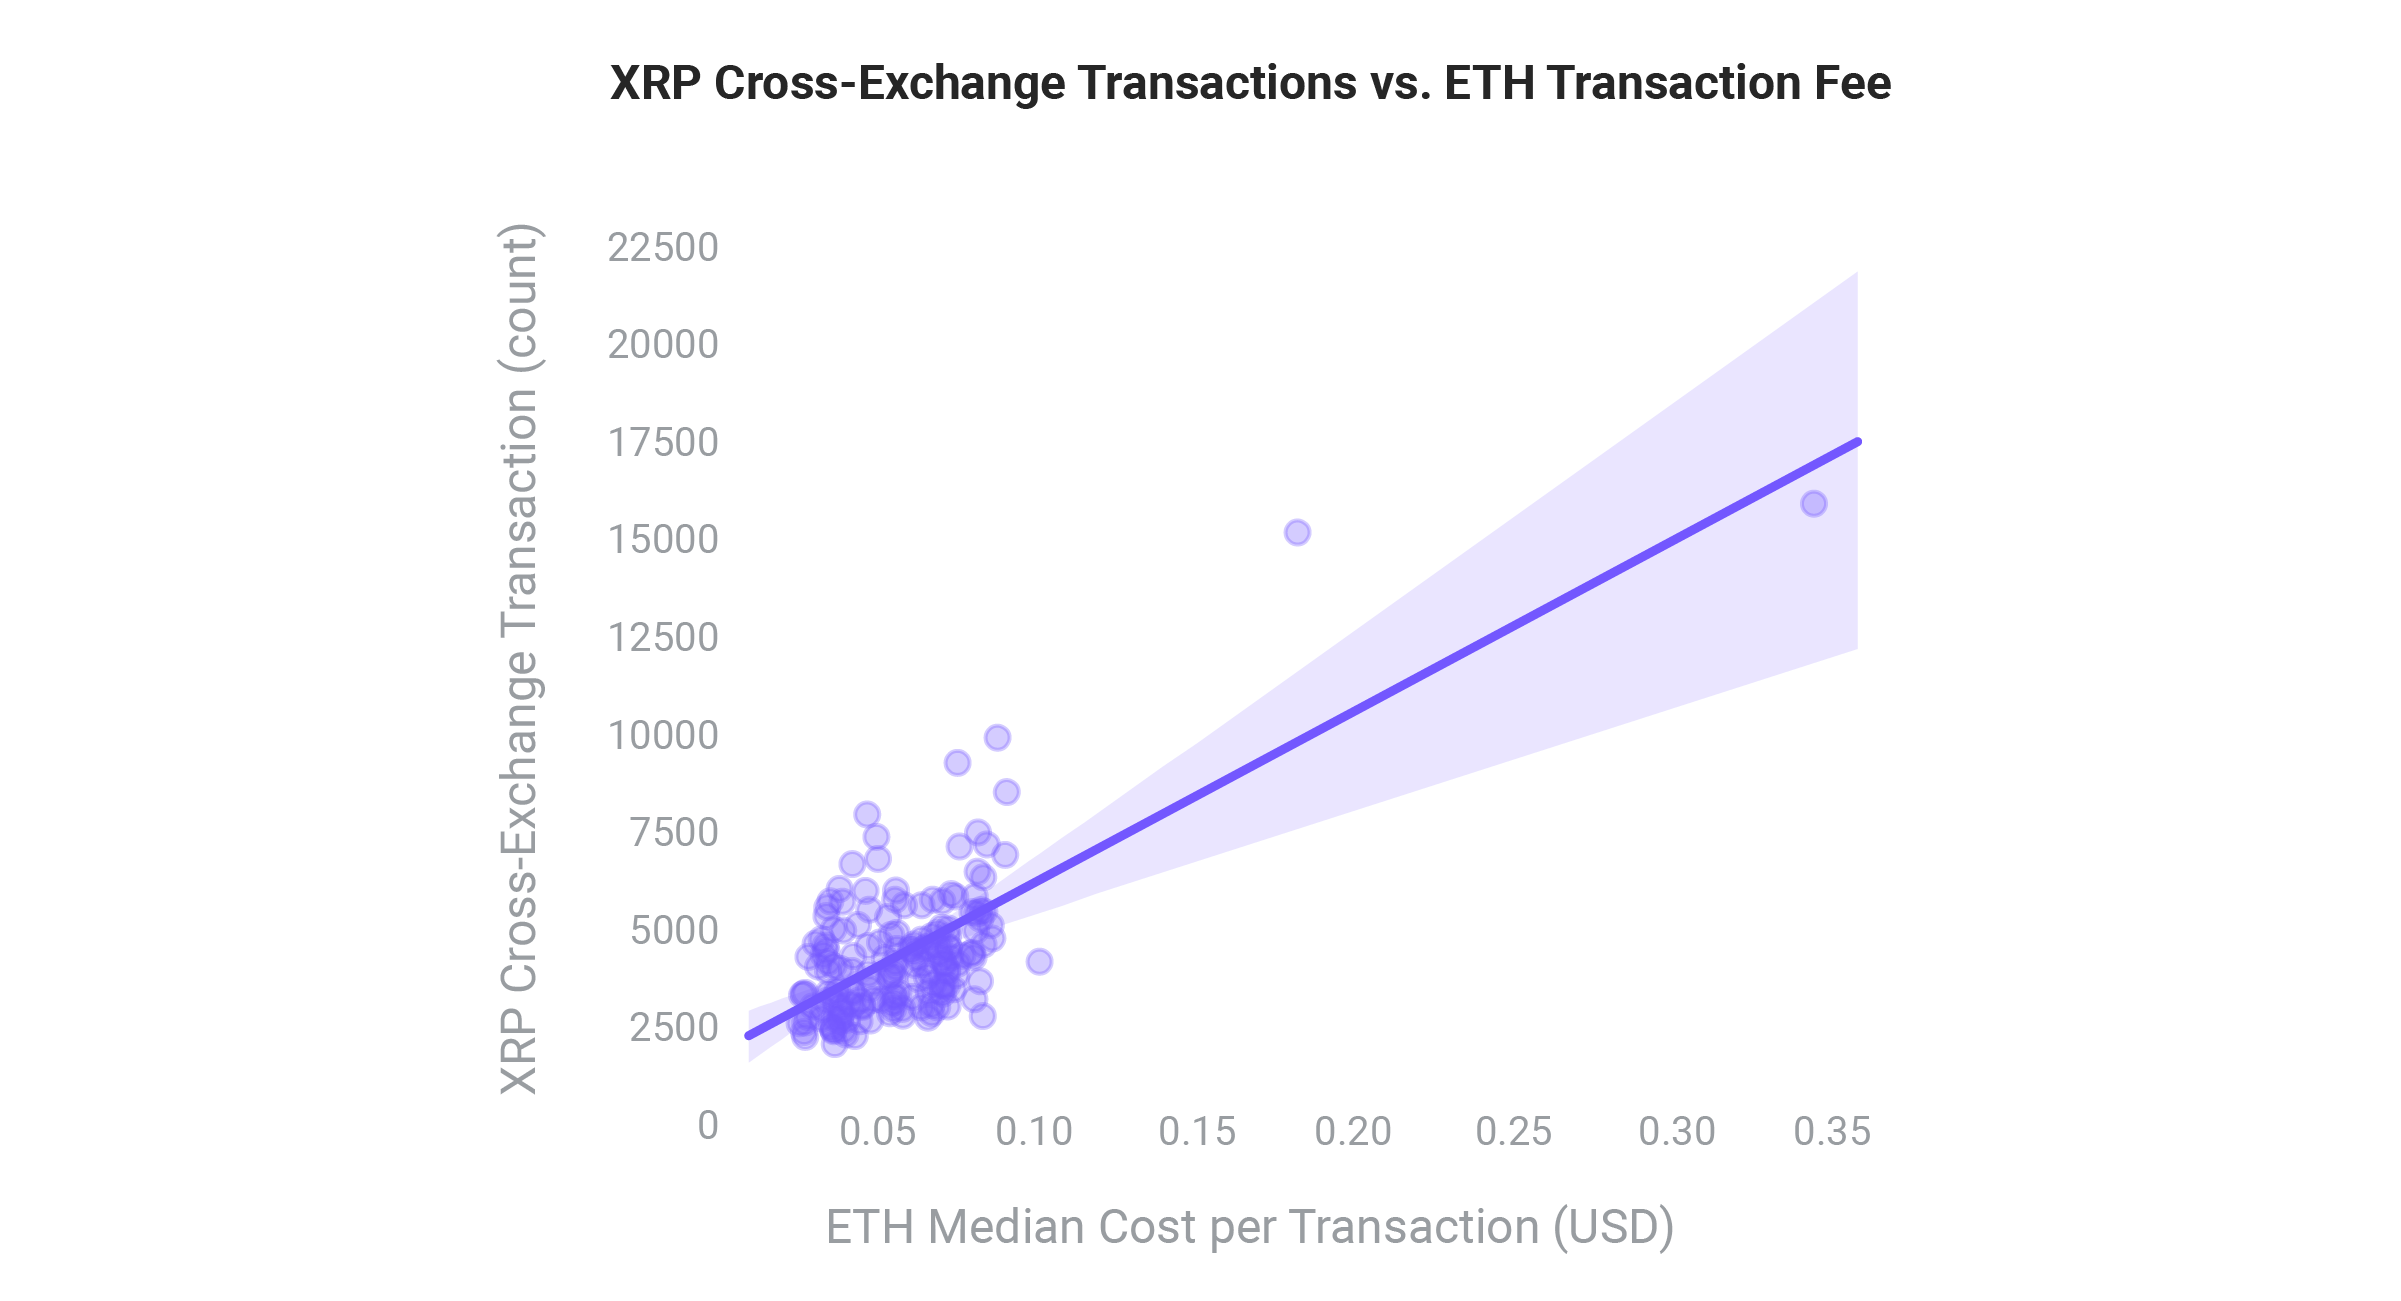 Chart from Xpring's "How XRP Enables Faster, Low-Cost Cross Exchange Transfers" by Shae Wang, data analyst at the firm